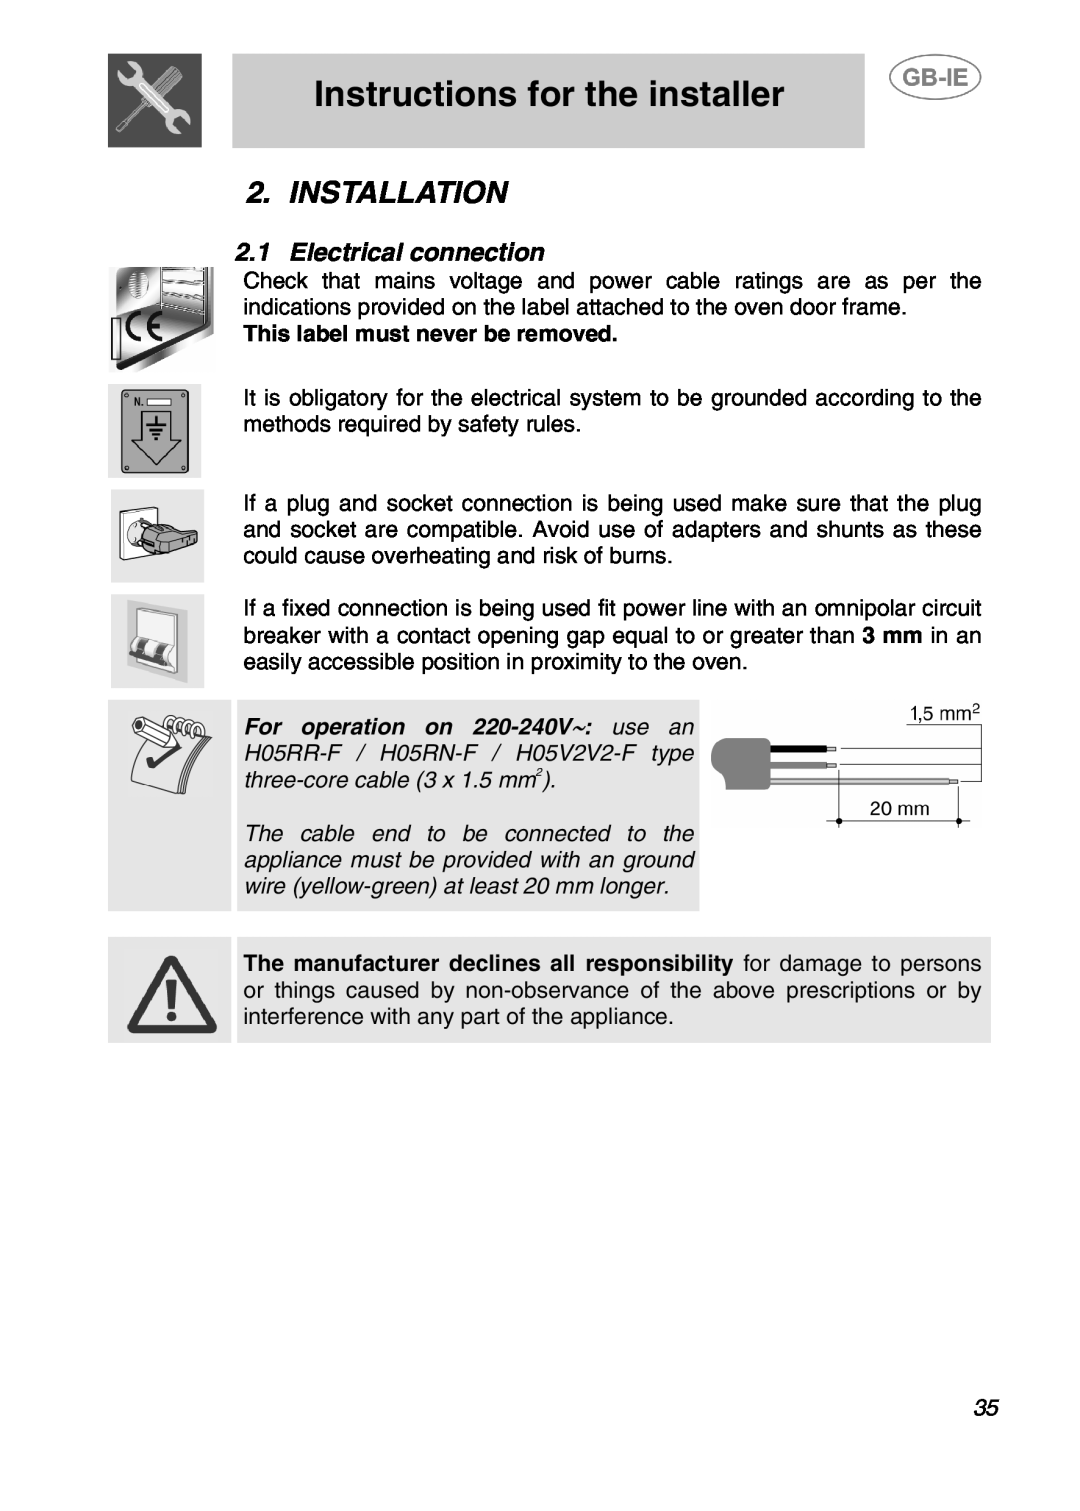 Smeg 166PZ-5 Instructions for the installer, Installation, 2.1Electrical connection, This label must never be removed 